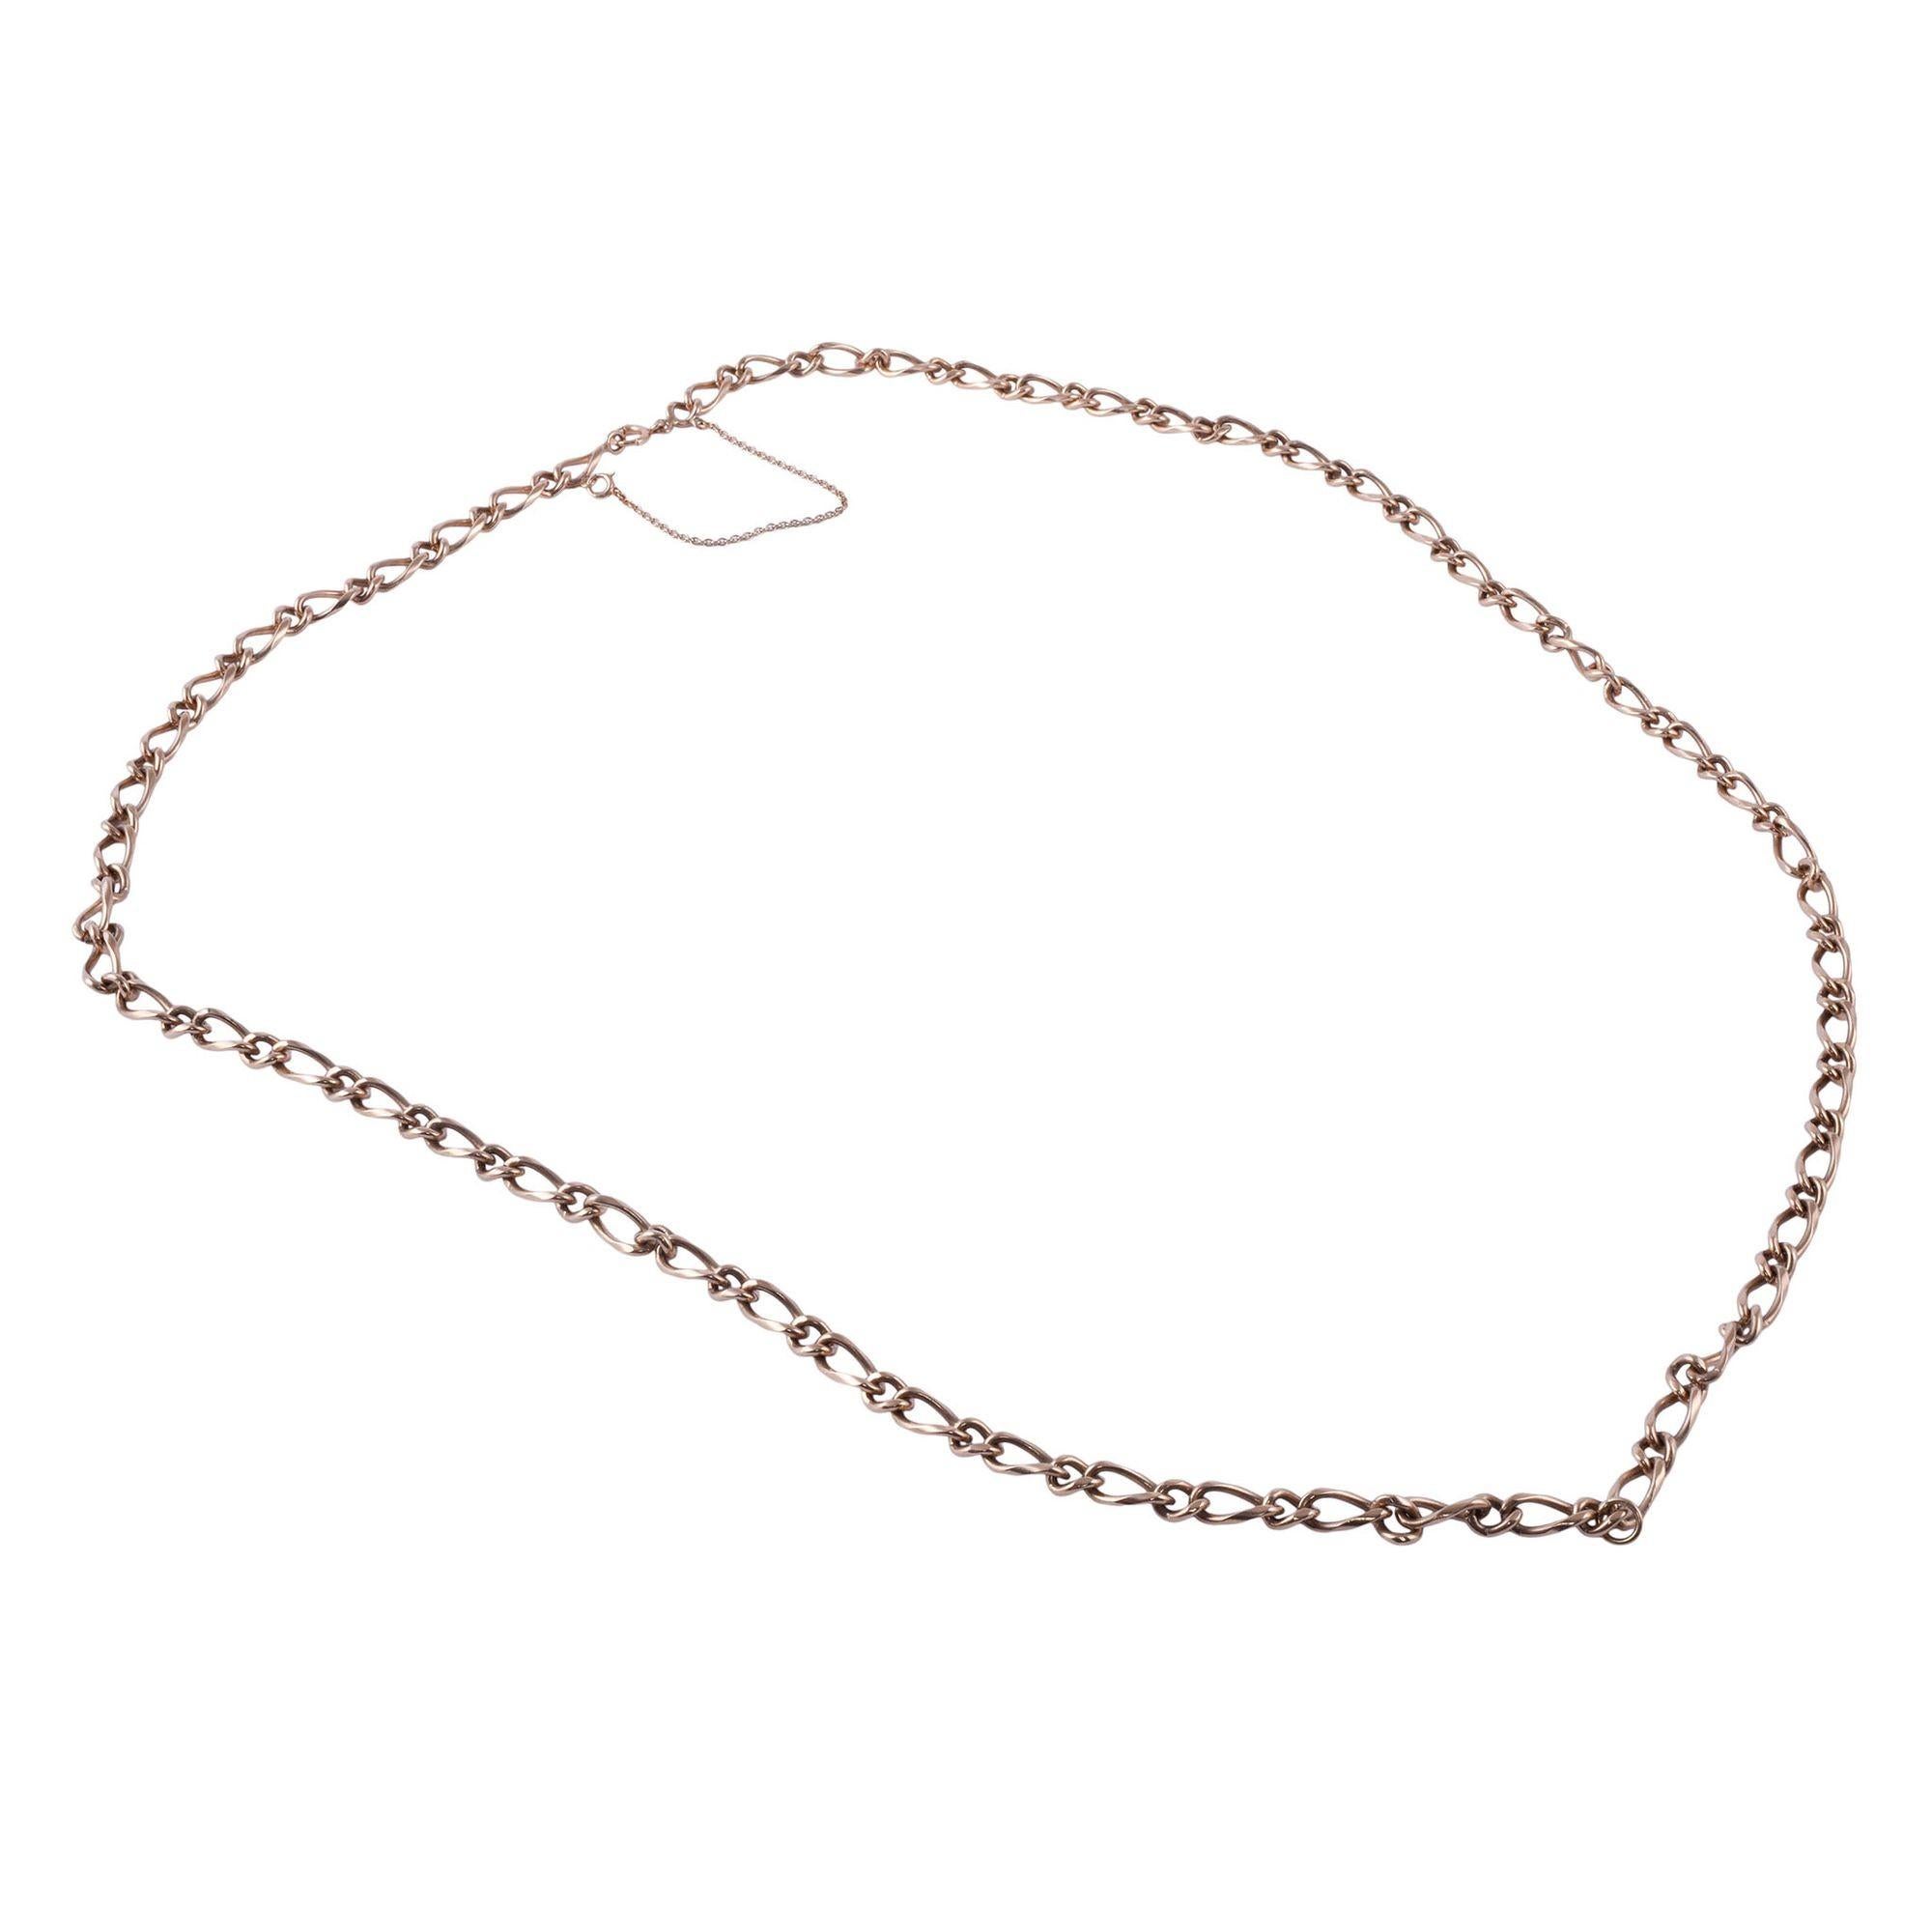 Antique 30 inch 14K gold chain figaro necklace, circa 1900. This chain necklace is crafted in 14 karat yellow gold in a wide figaro link style. The figaro chain features a safety chain, a spring ring clasp, and a loop for hanging. [KIMH